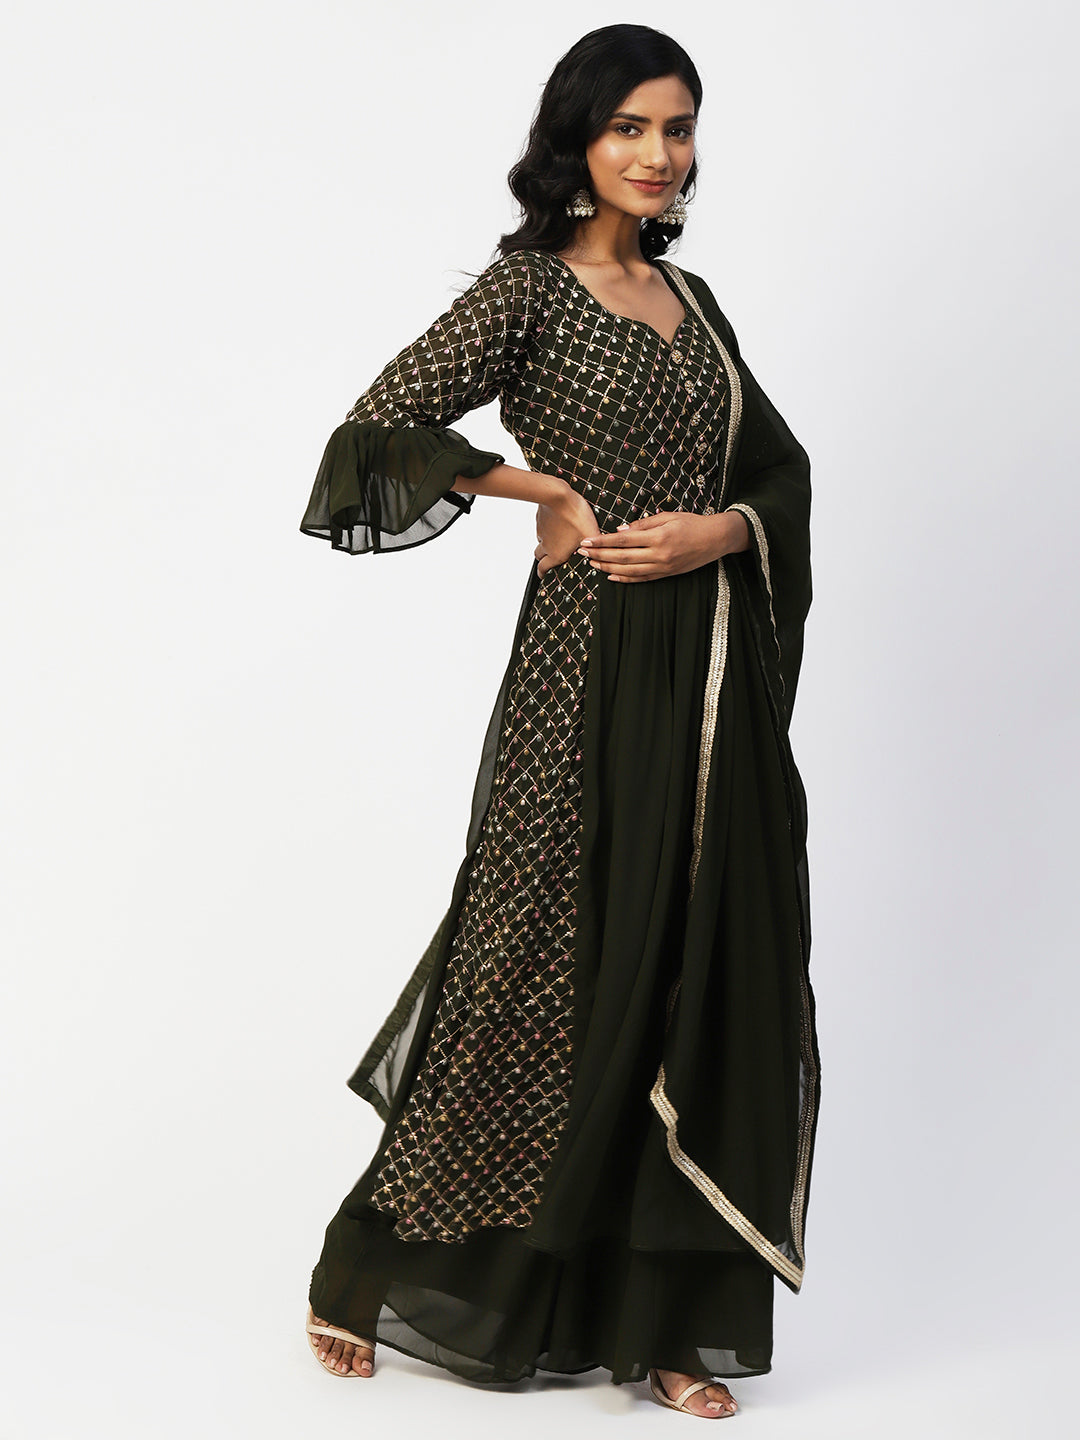 Green Georgette Sharara Suit With Embroidery - PepaBai